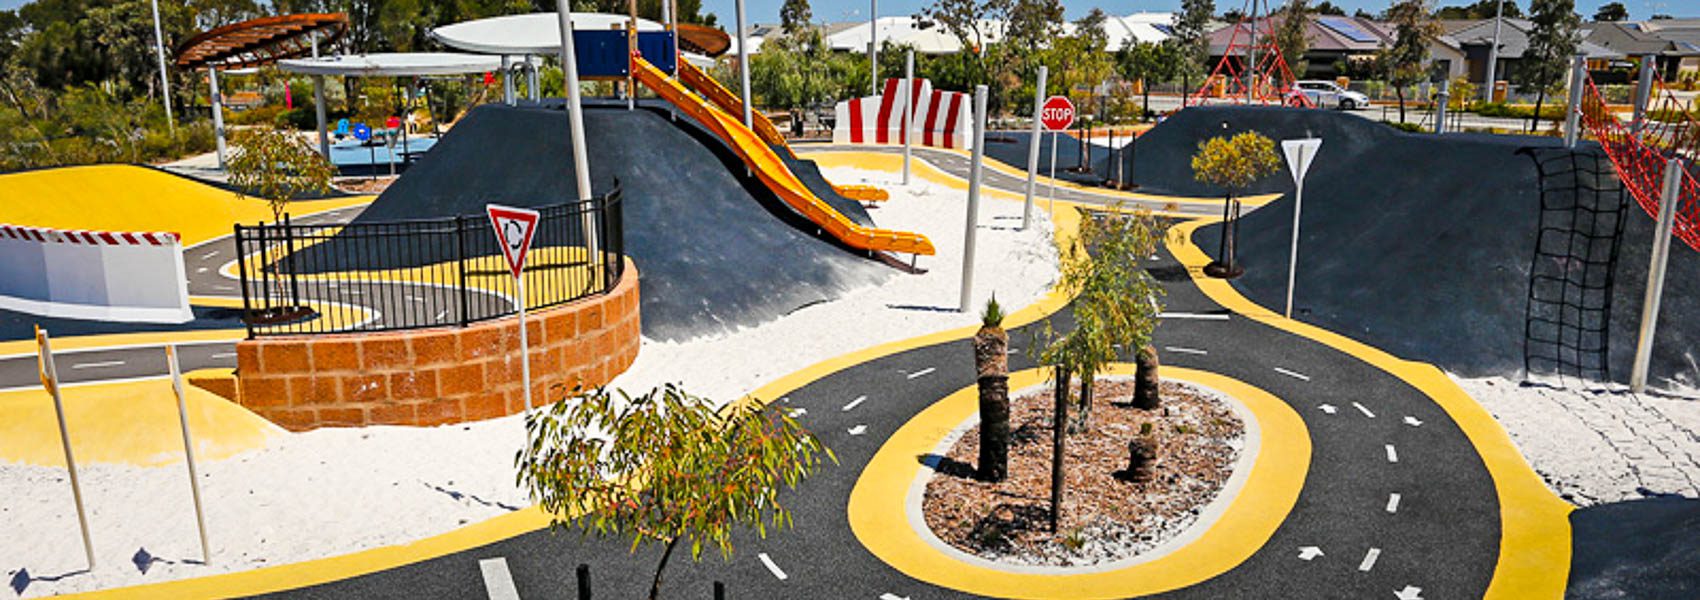 The Pitstop Park in Banksia Grove is great for kids learning to ride a bike